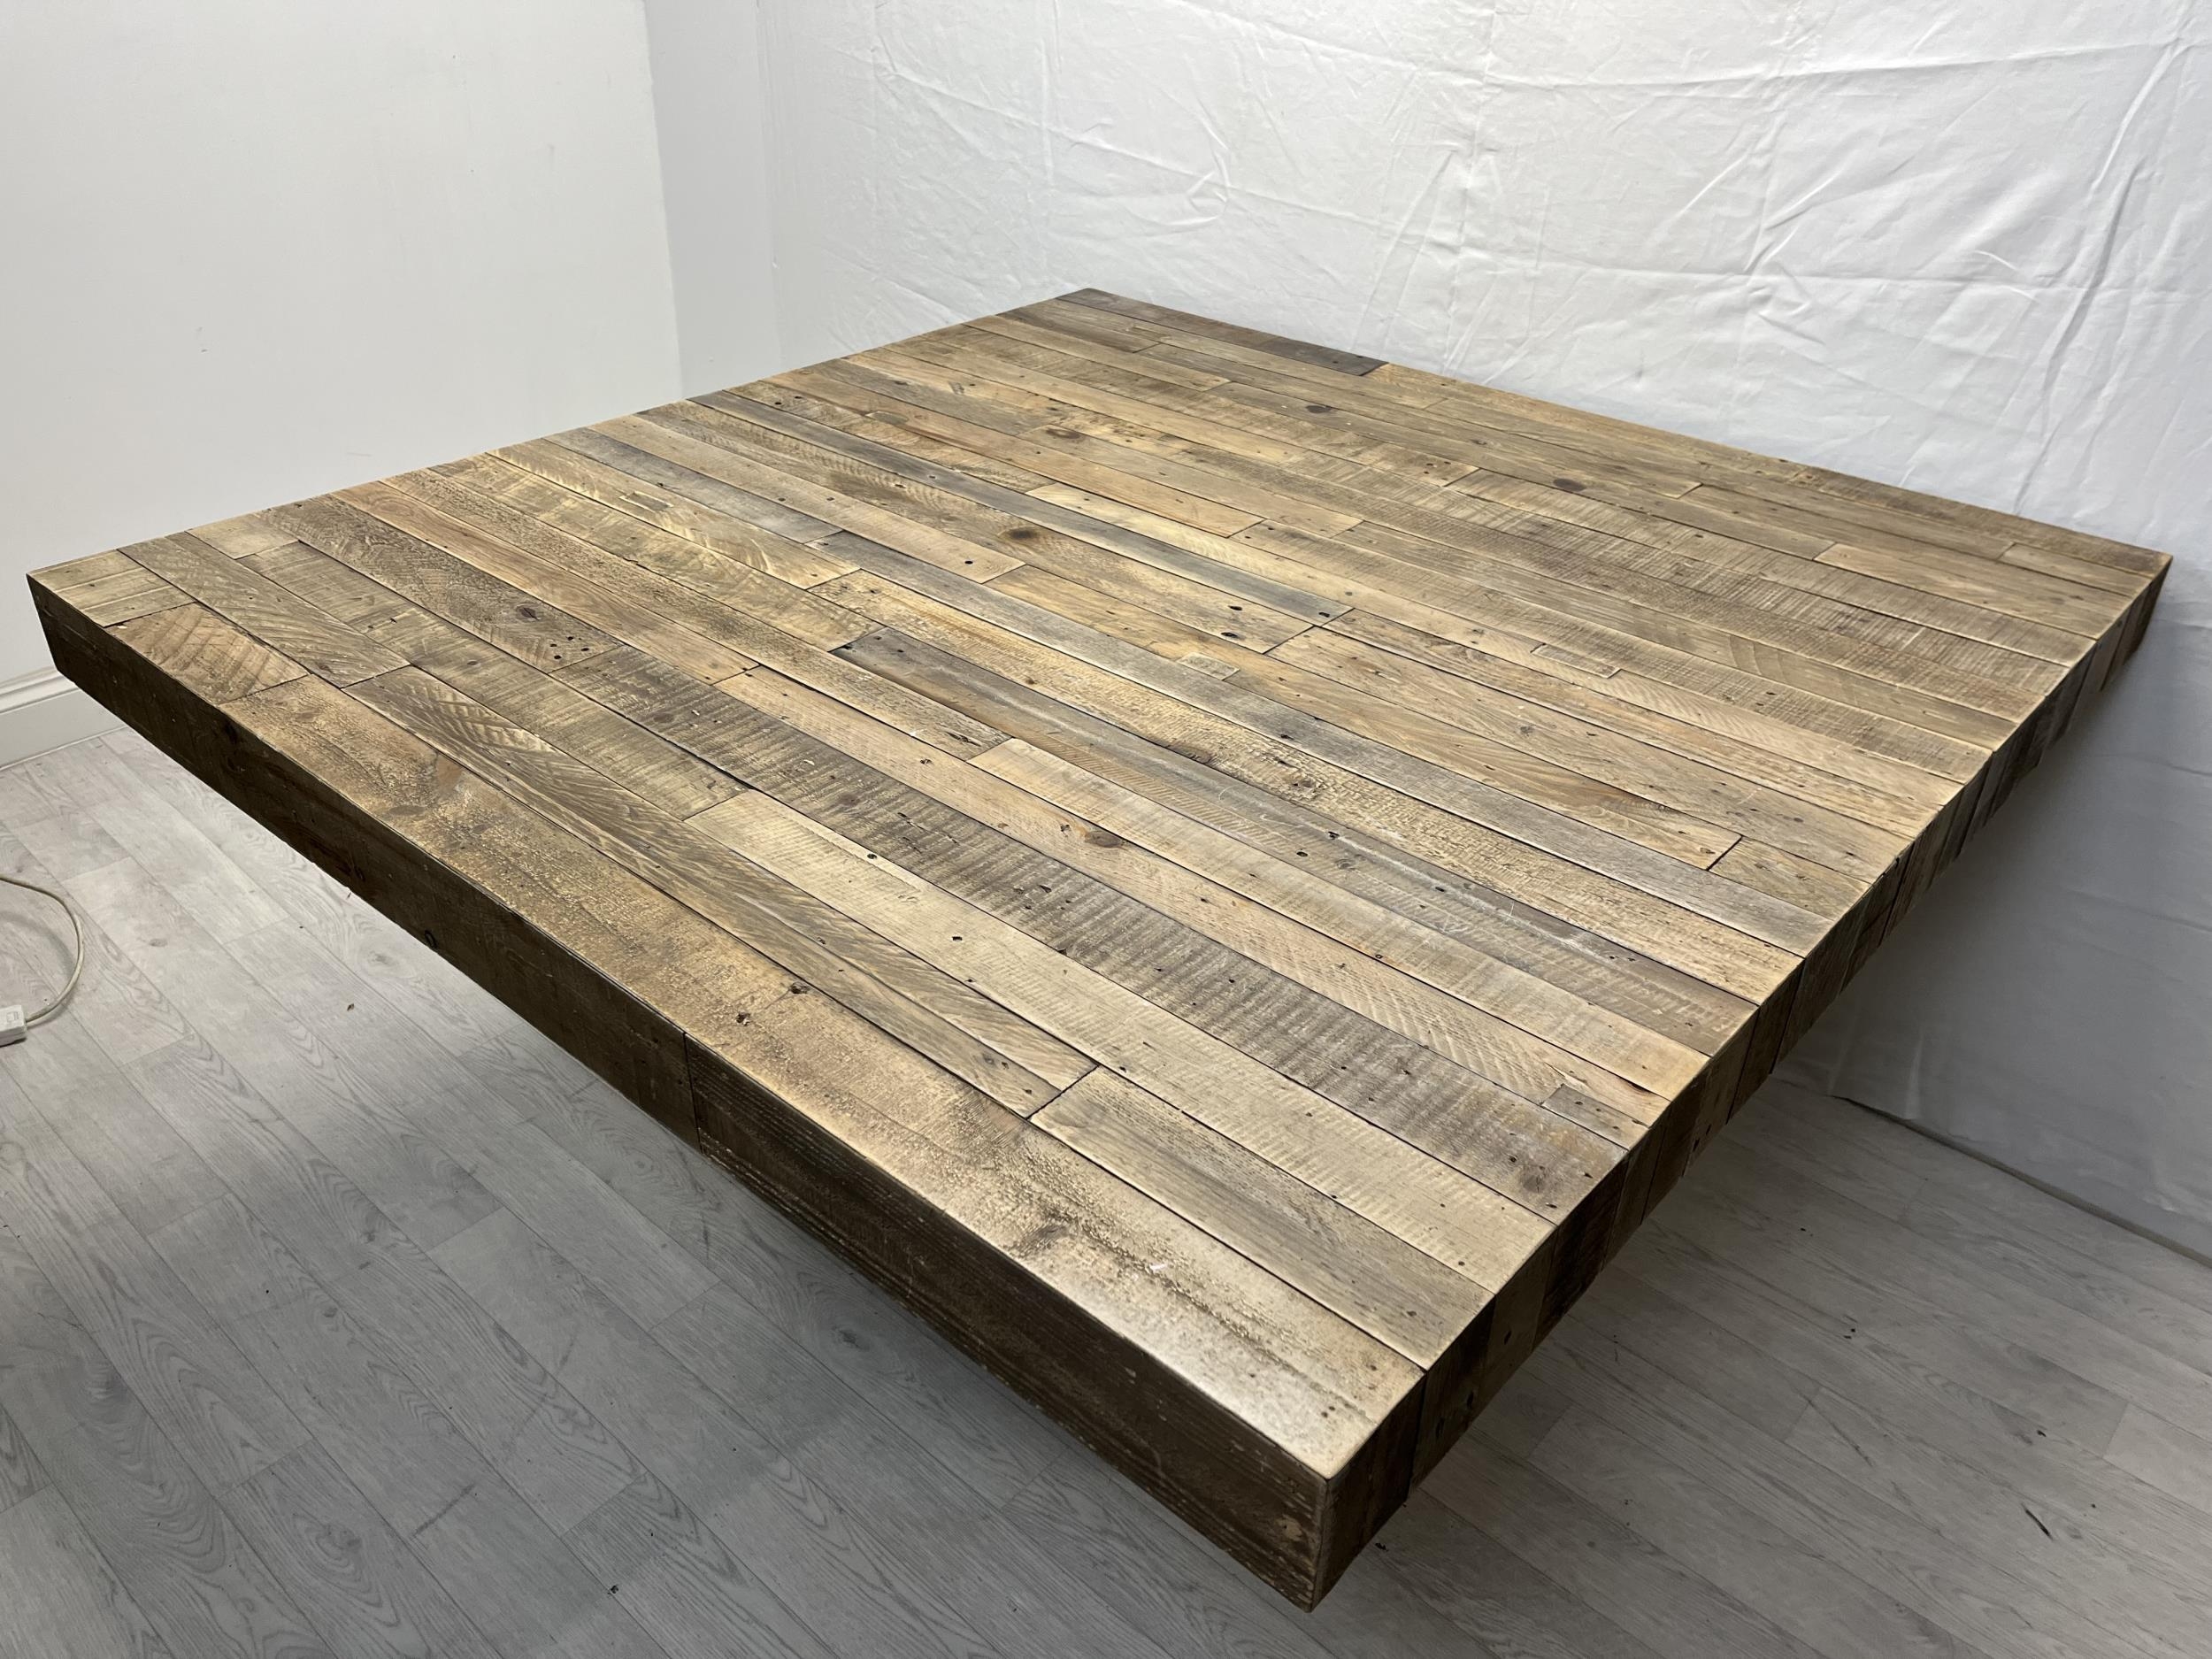 Dining table, contemporary from reclaimed timber. Comes in two parts. H.76 W.148 D.148cm. - Image 3 of 5